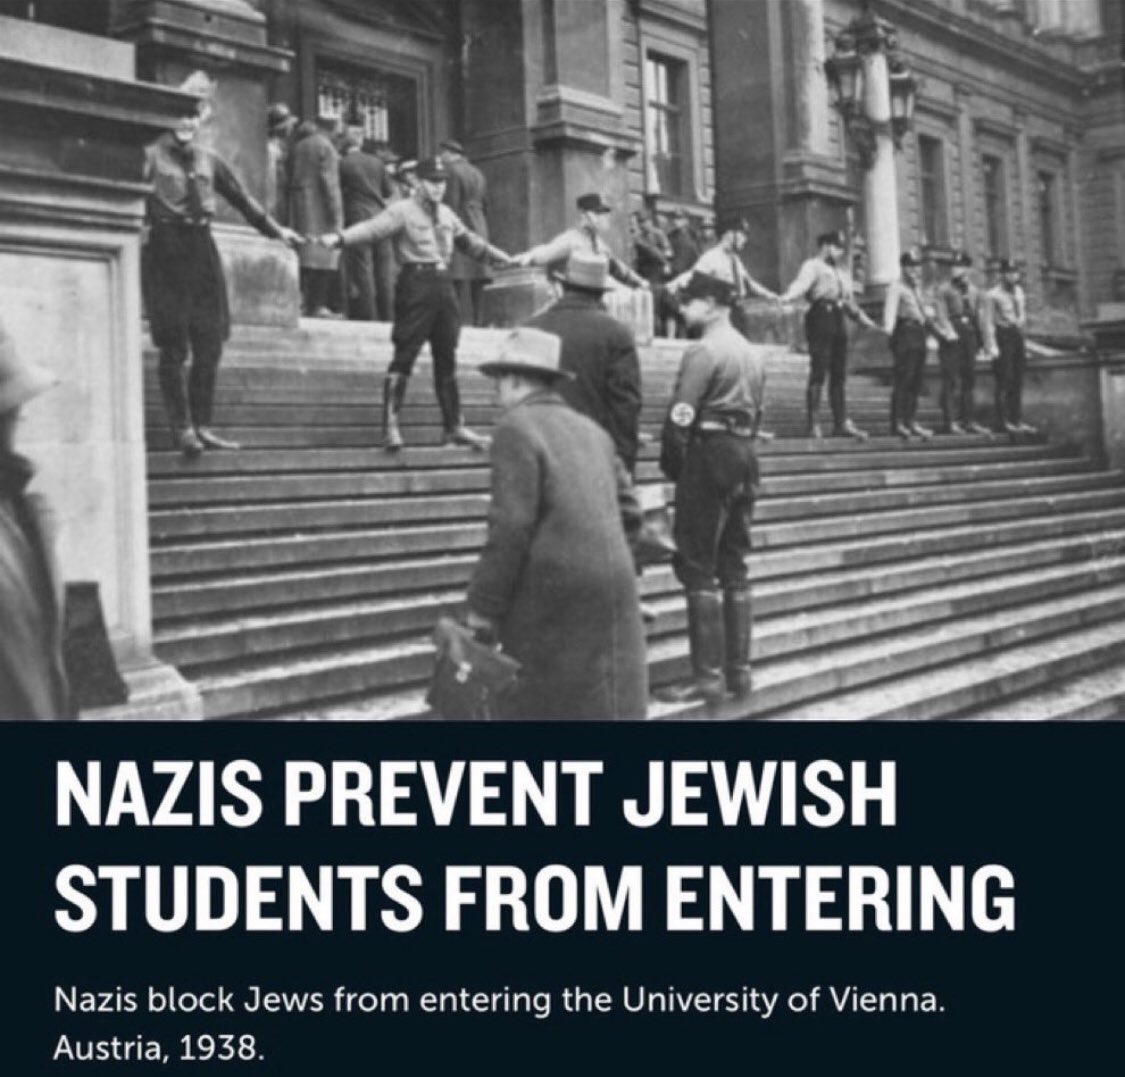 Same anti-Jewish human chain was formed by students at Yale University yesterday evening. Just watch the video below